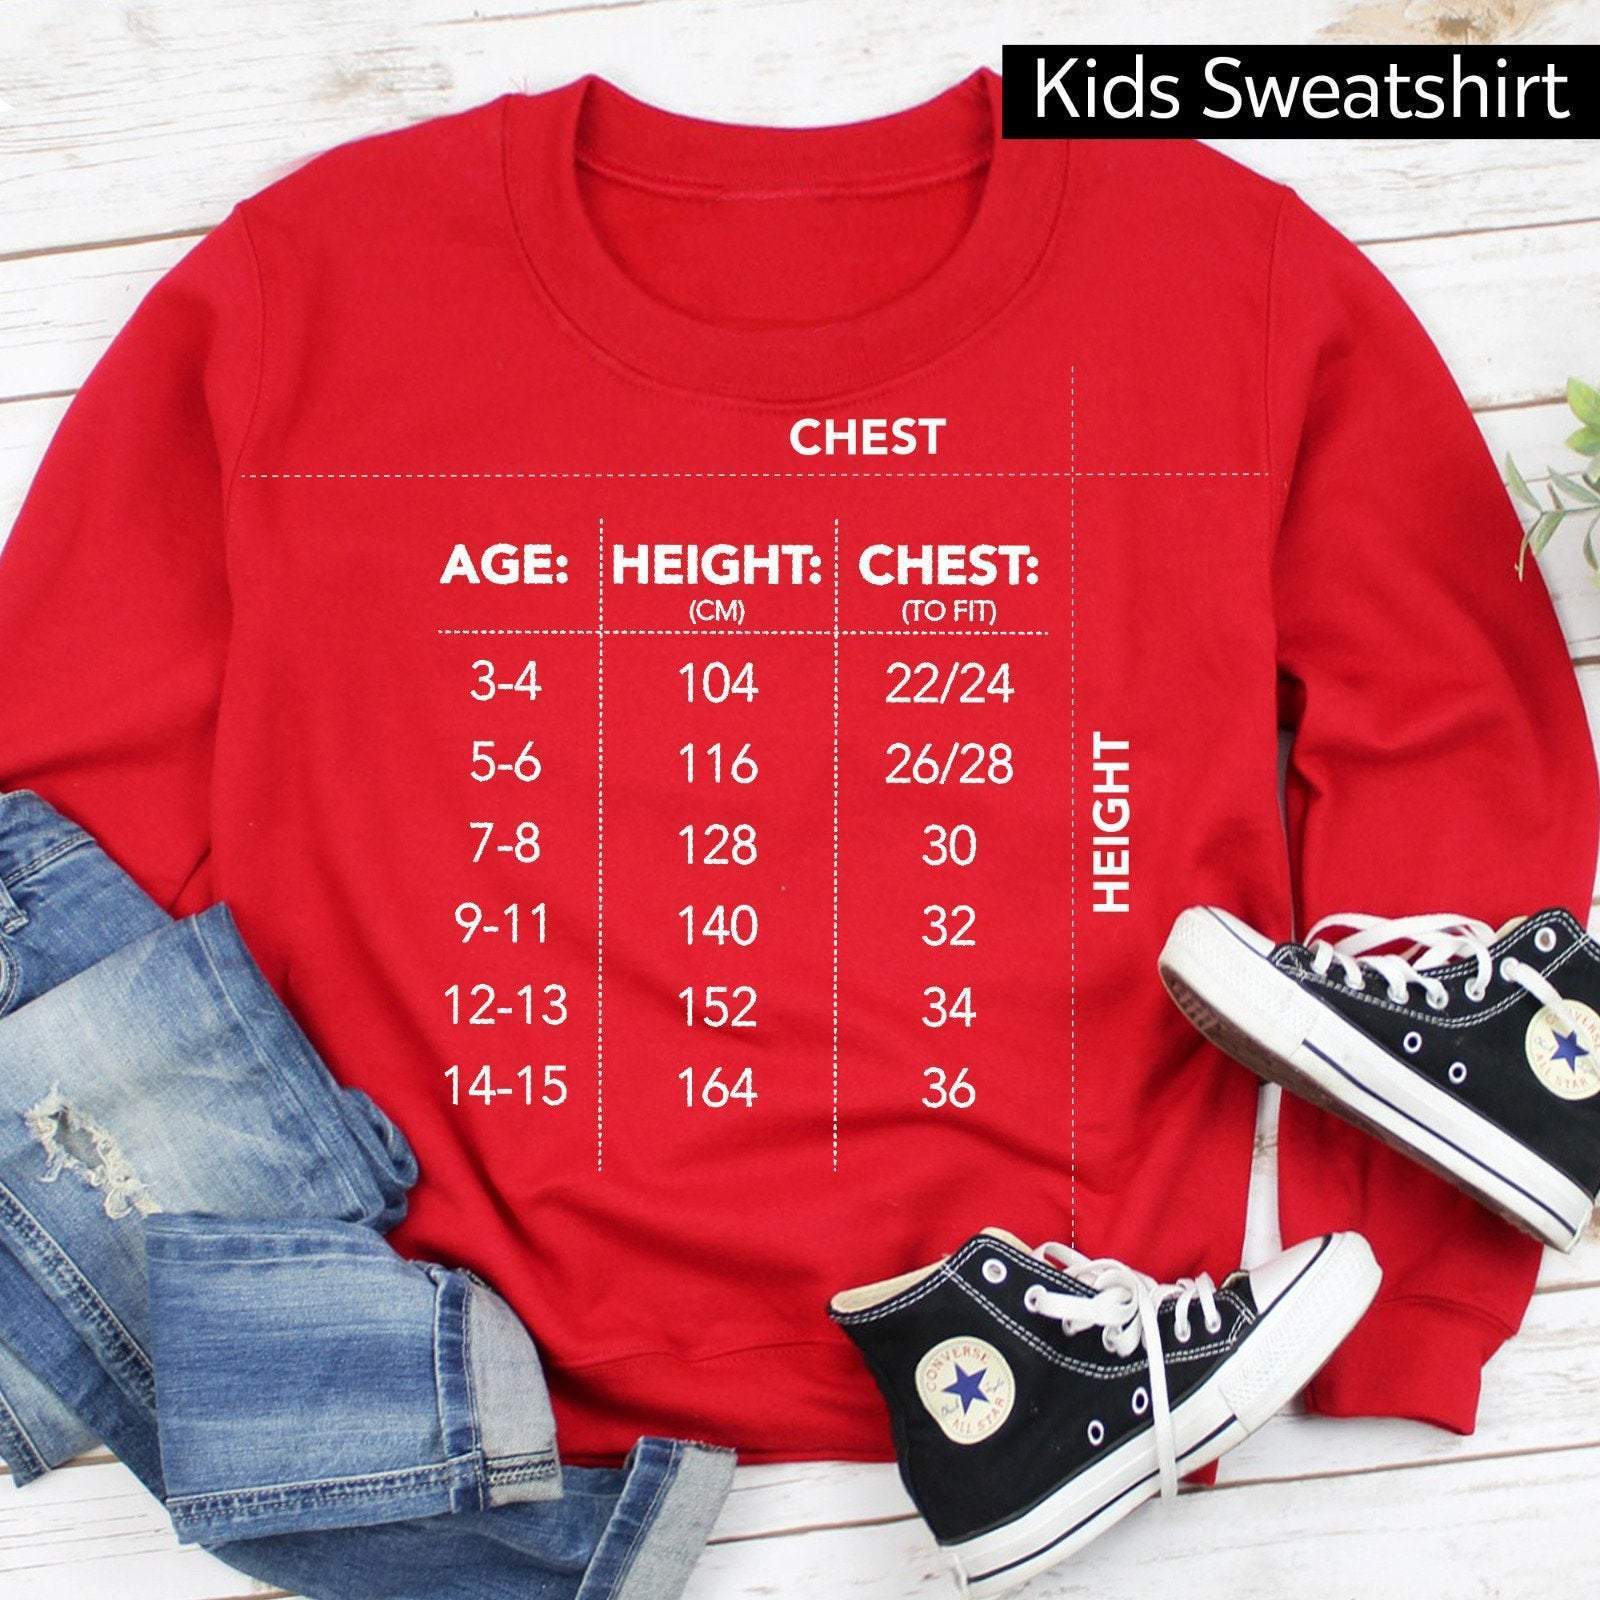 Year of Birth jumper, Personalised Year top, Birthday jumper, Any Year Printed